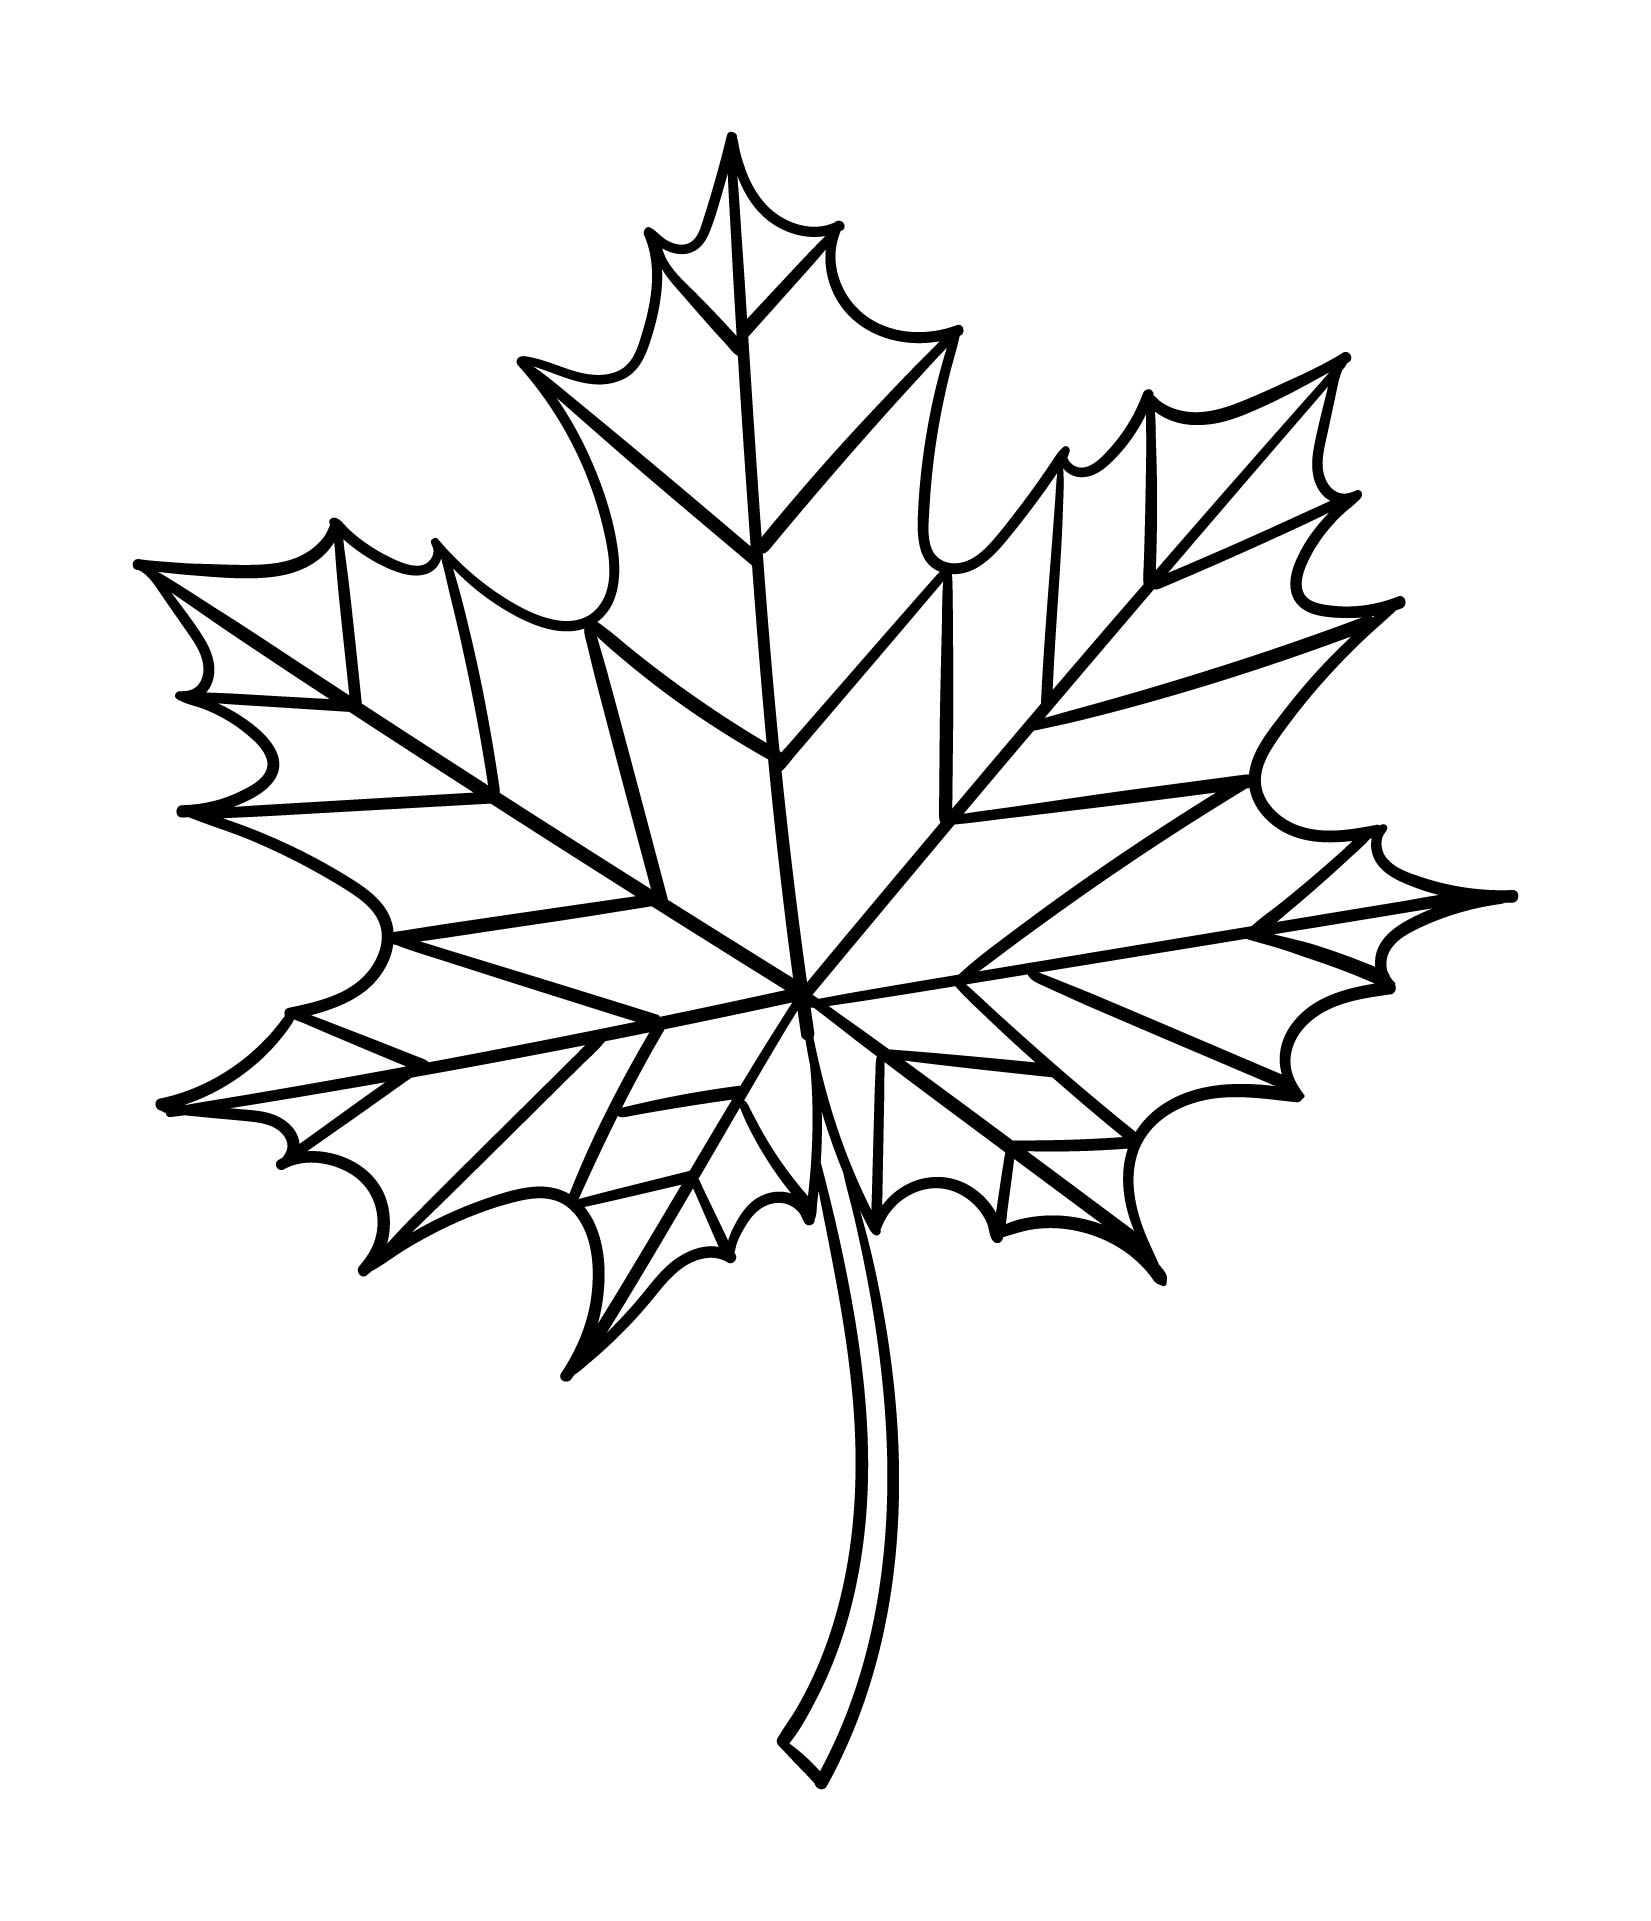 Printable Maple Leaf Stained Glass Fall Patterns